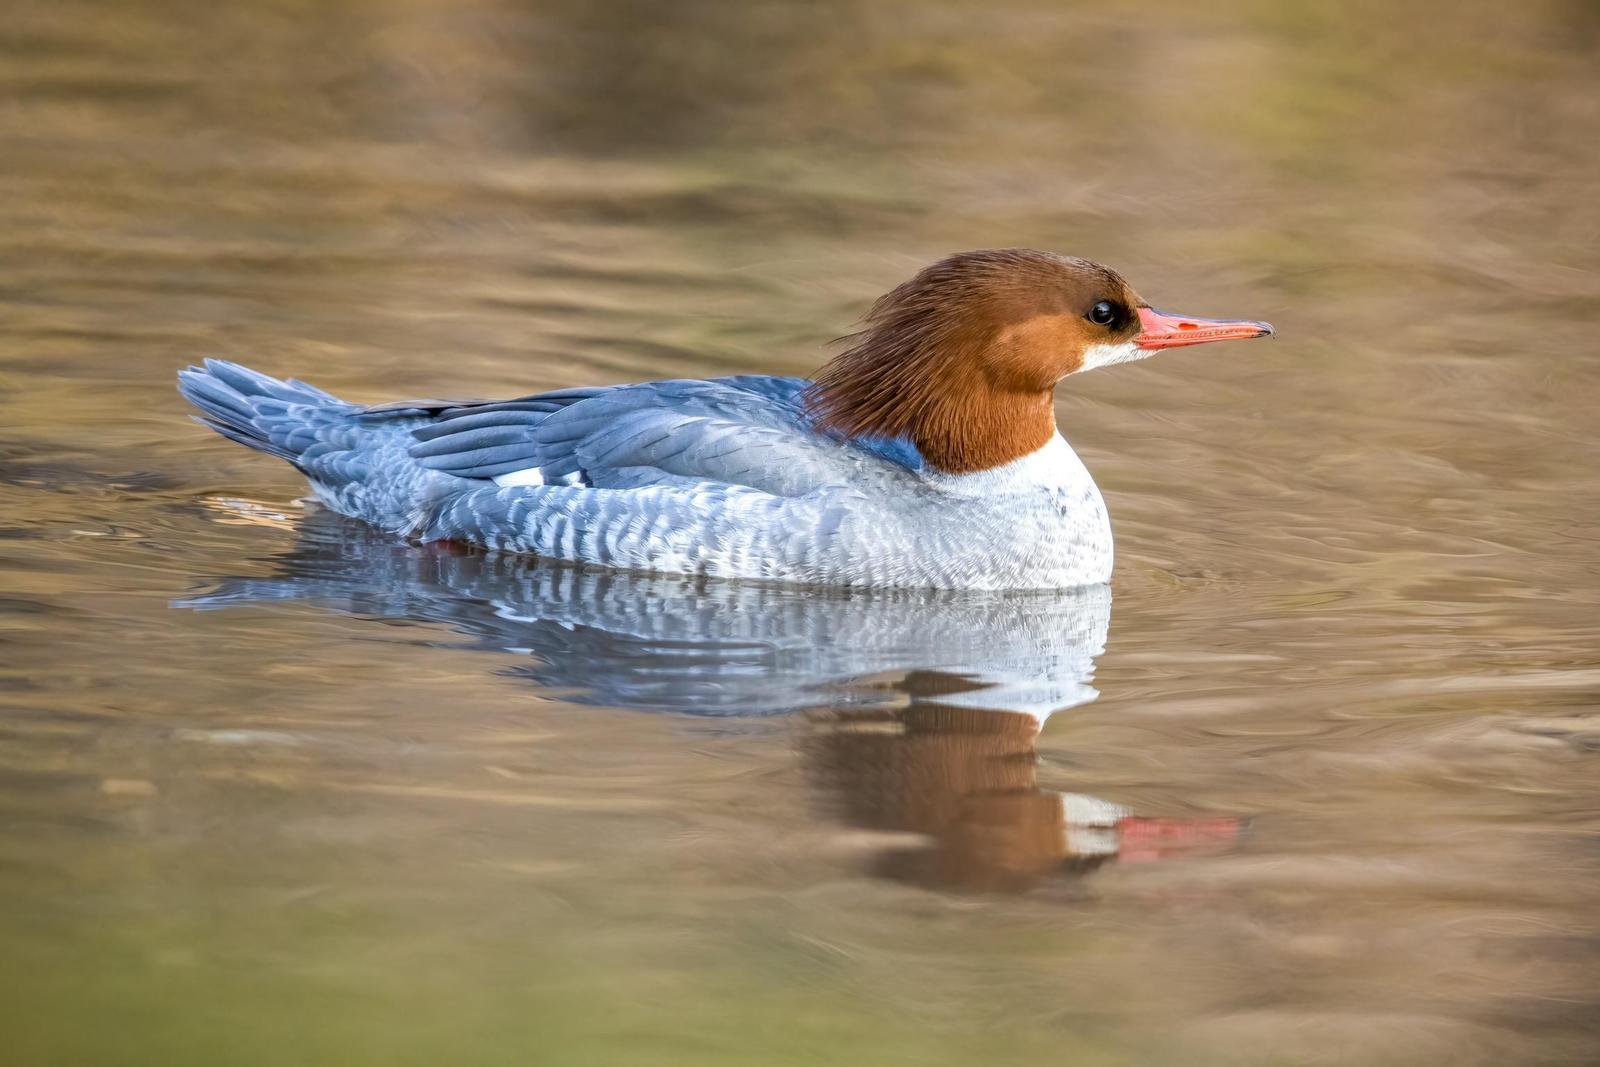 Common Merganser (North American) Photo by Tom Ford-Hutchinson